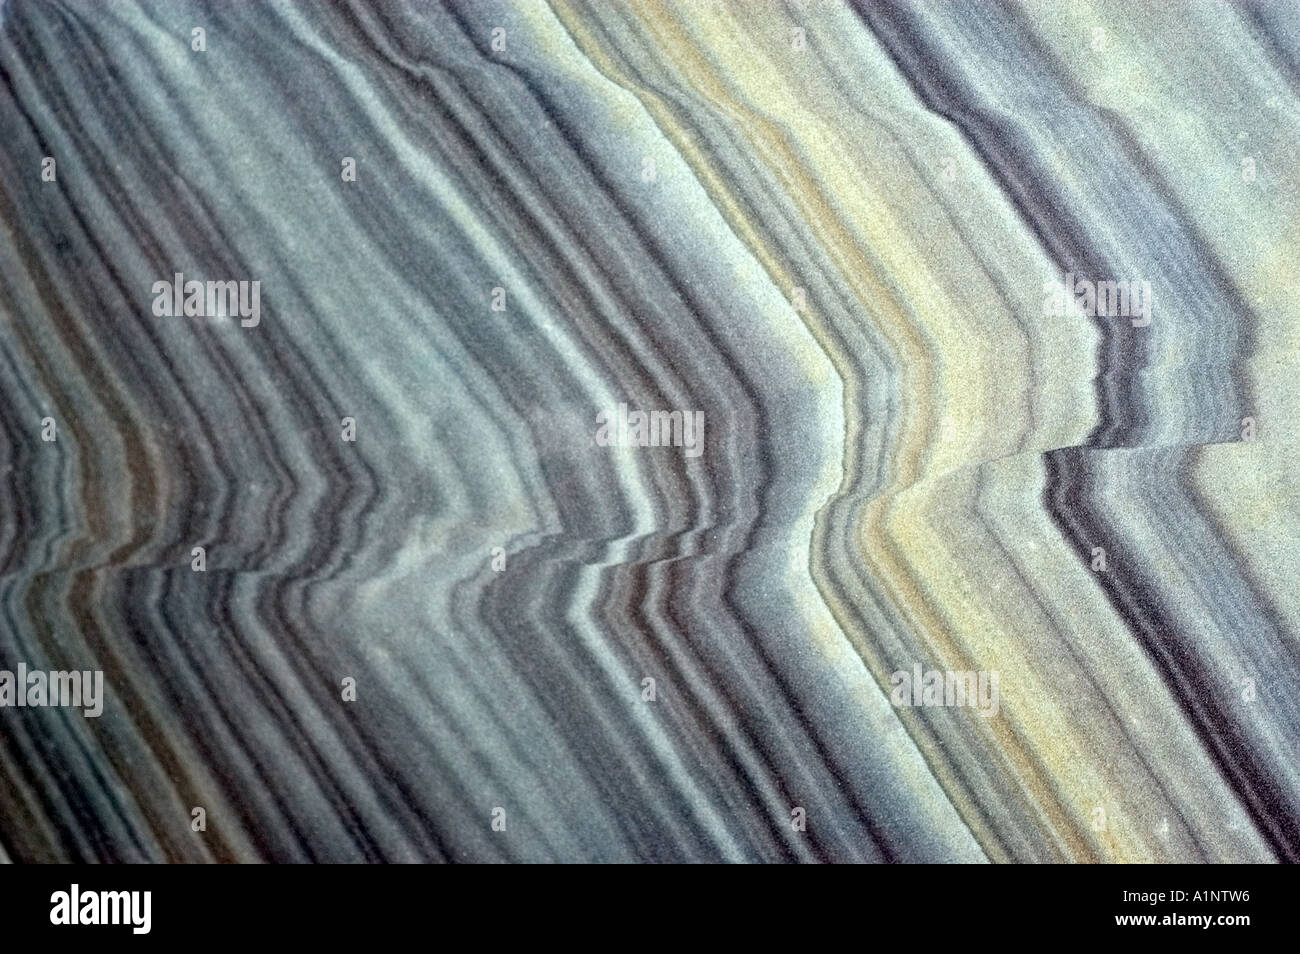 Reverse faults showing drag in sandstone Stock Photo